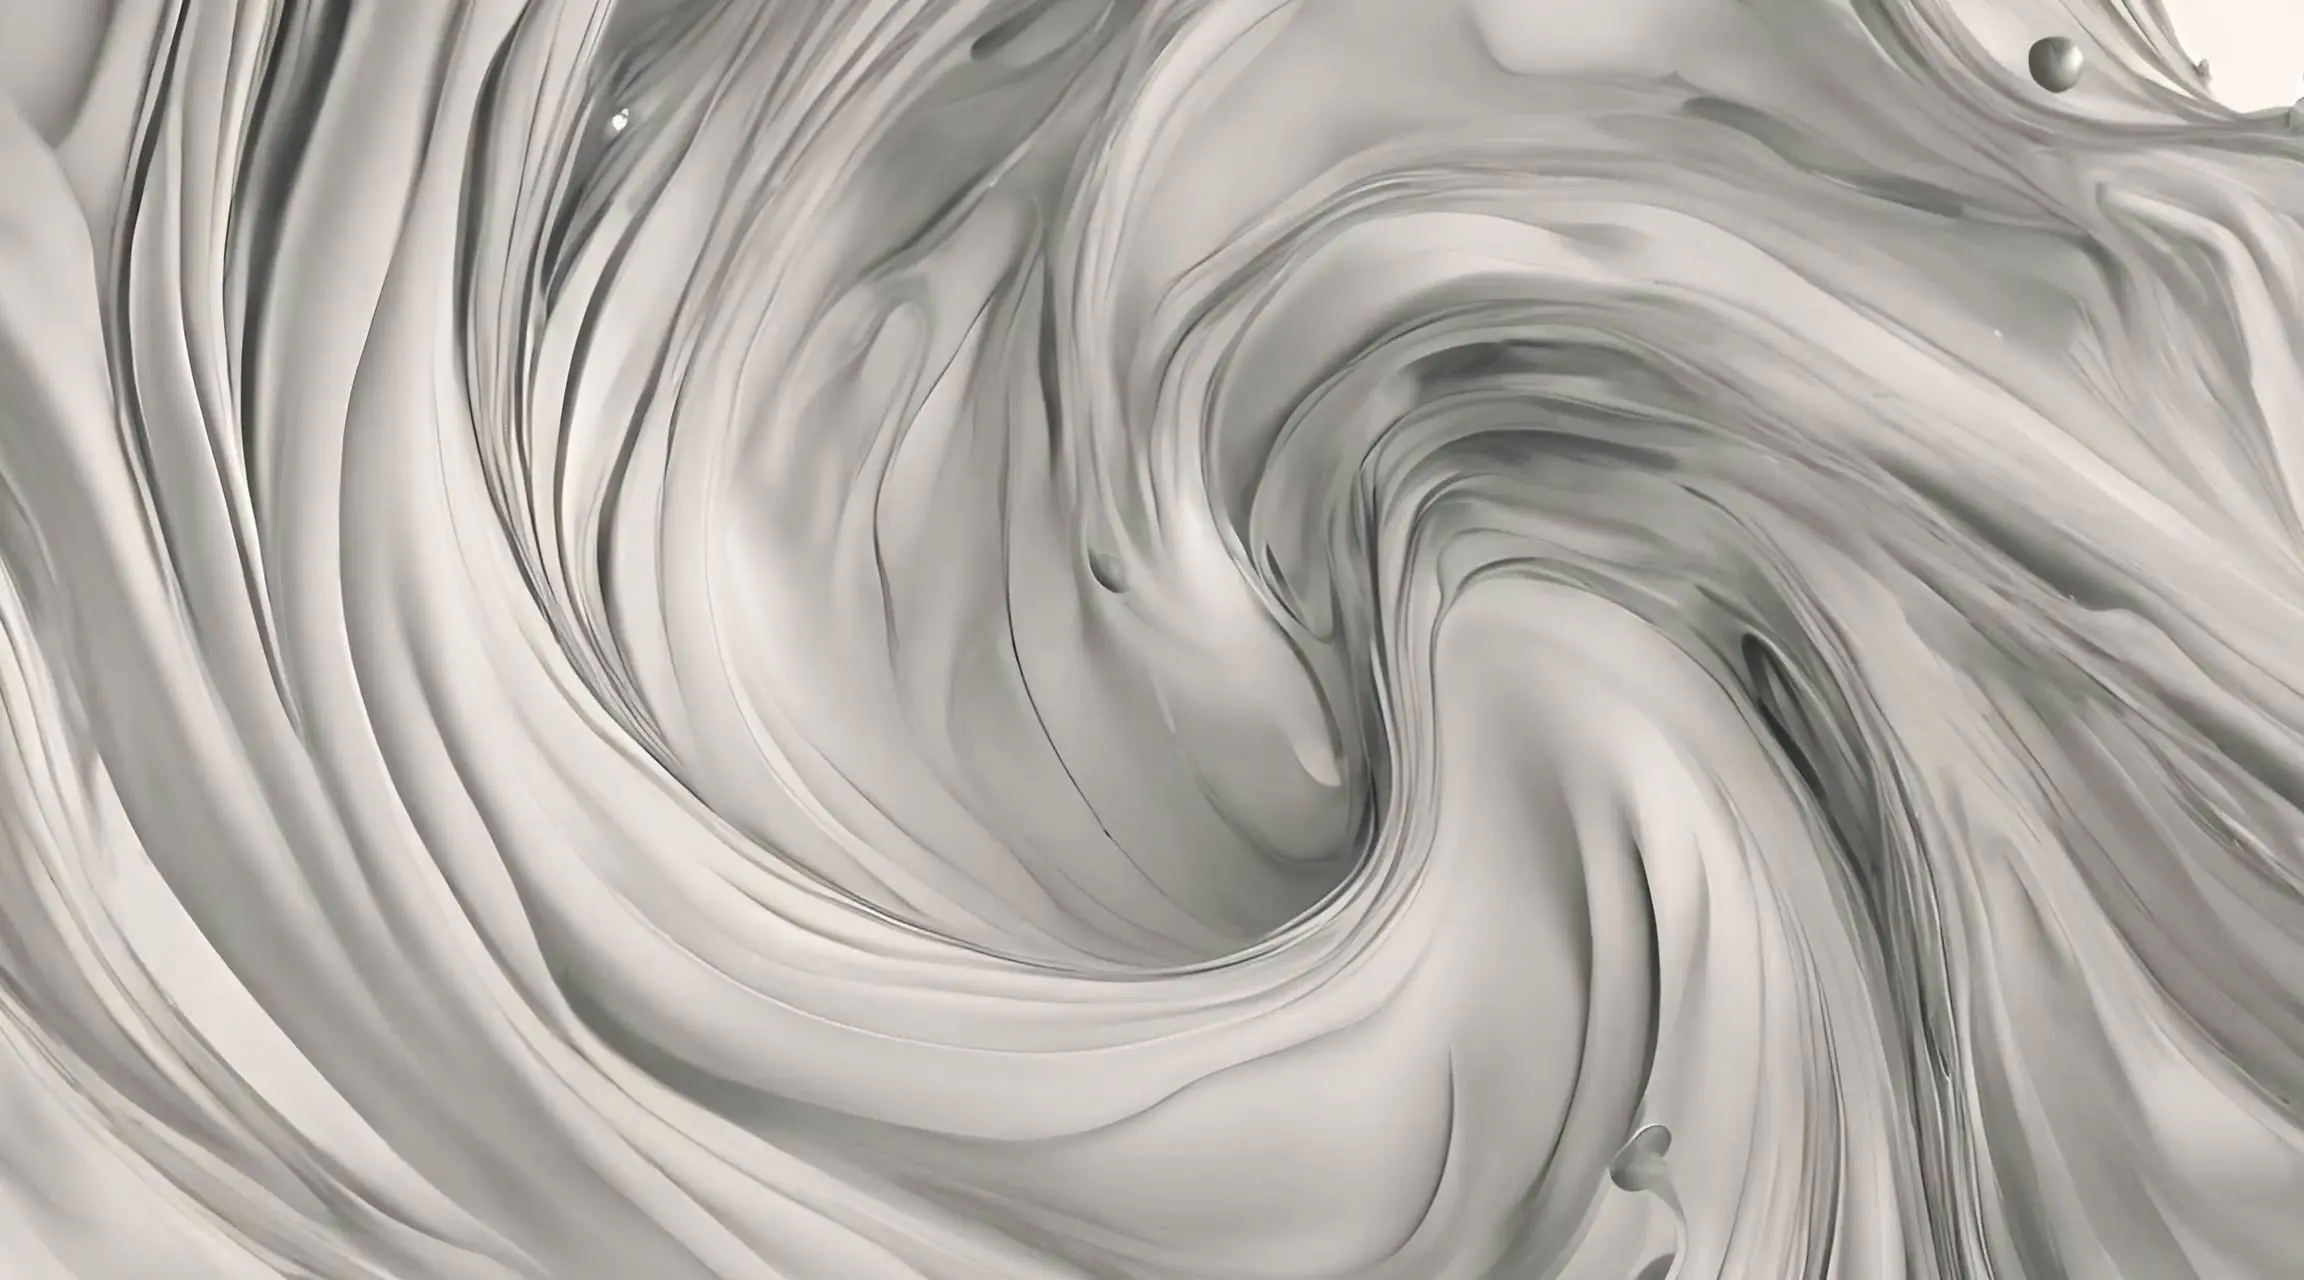 Fluid Grayscale Whorls Abstract Motion Art Video